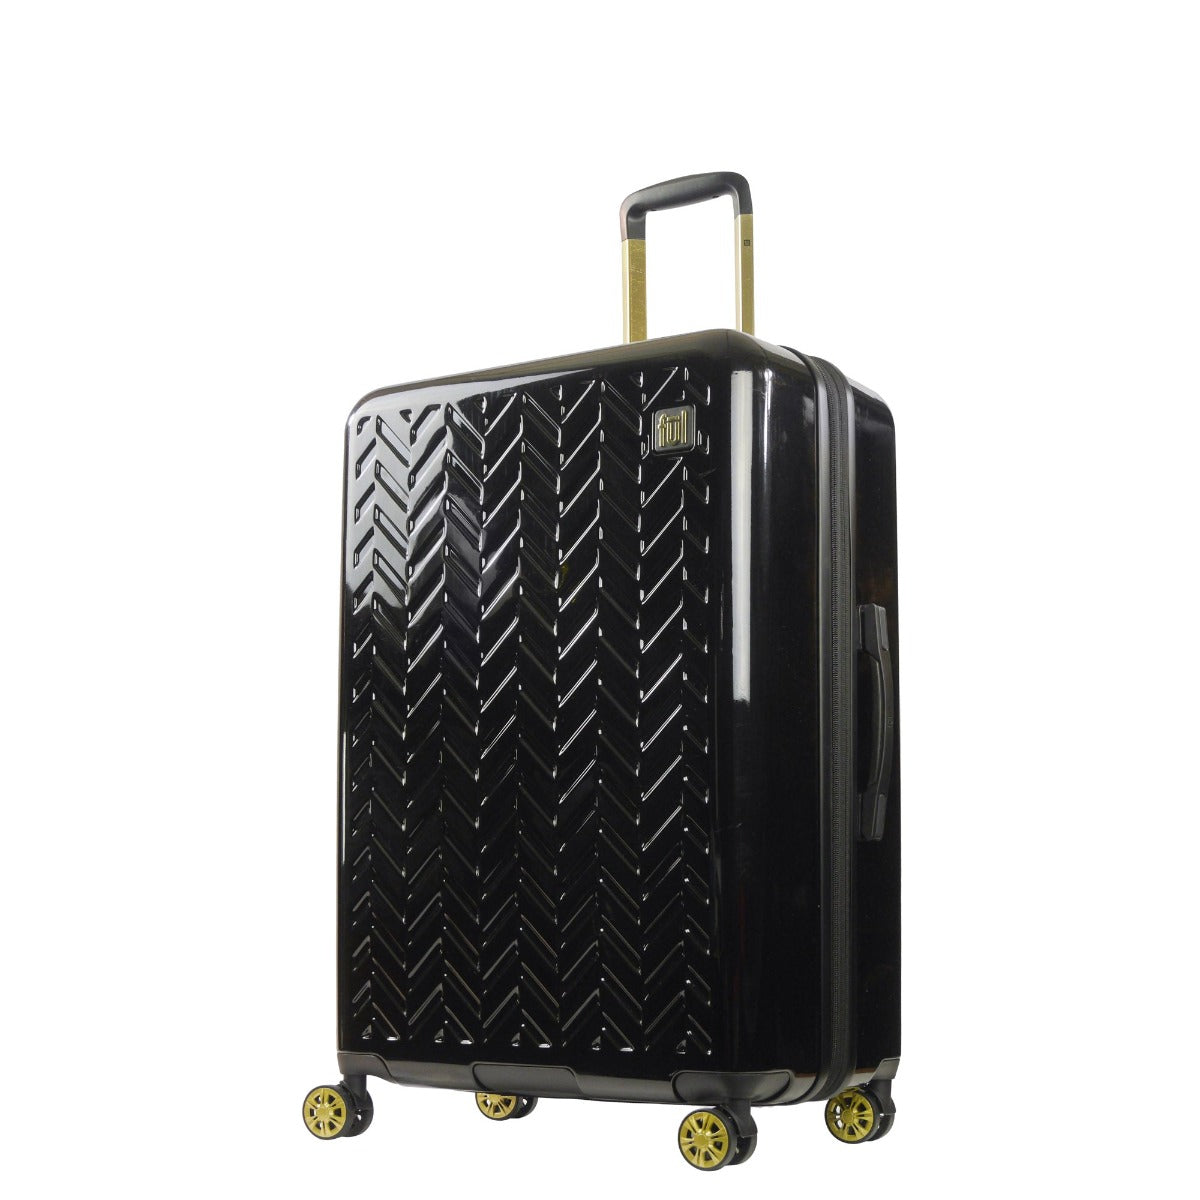 Ful Groove 31" hardside spinner suitcase checked black luggage gold details